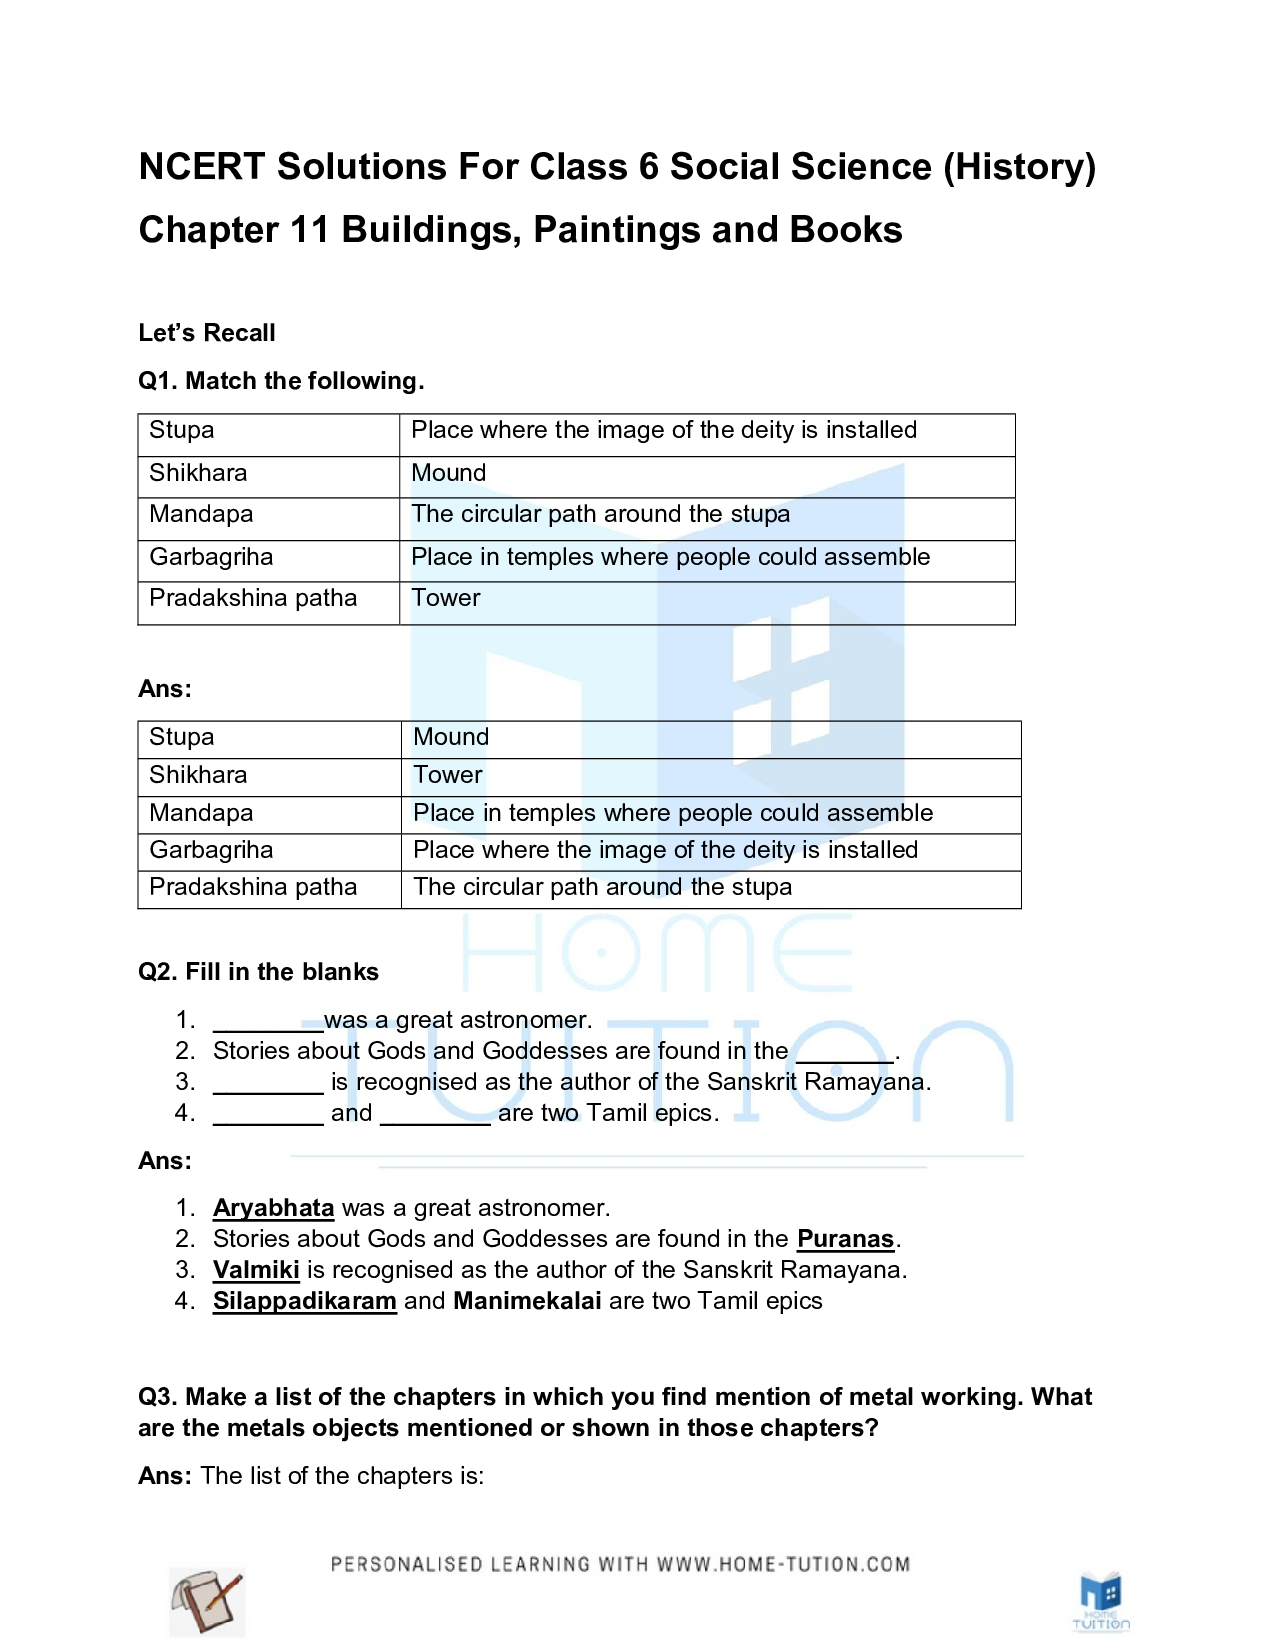 Chapter 11 Buildings, Paints and Books